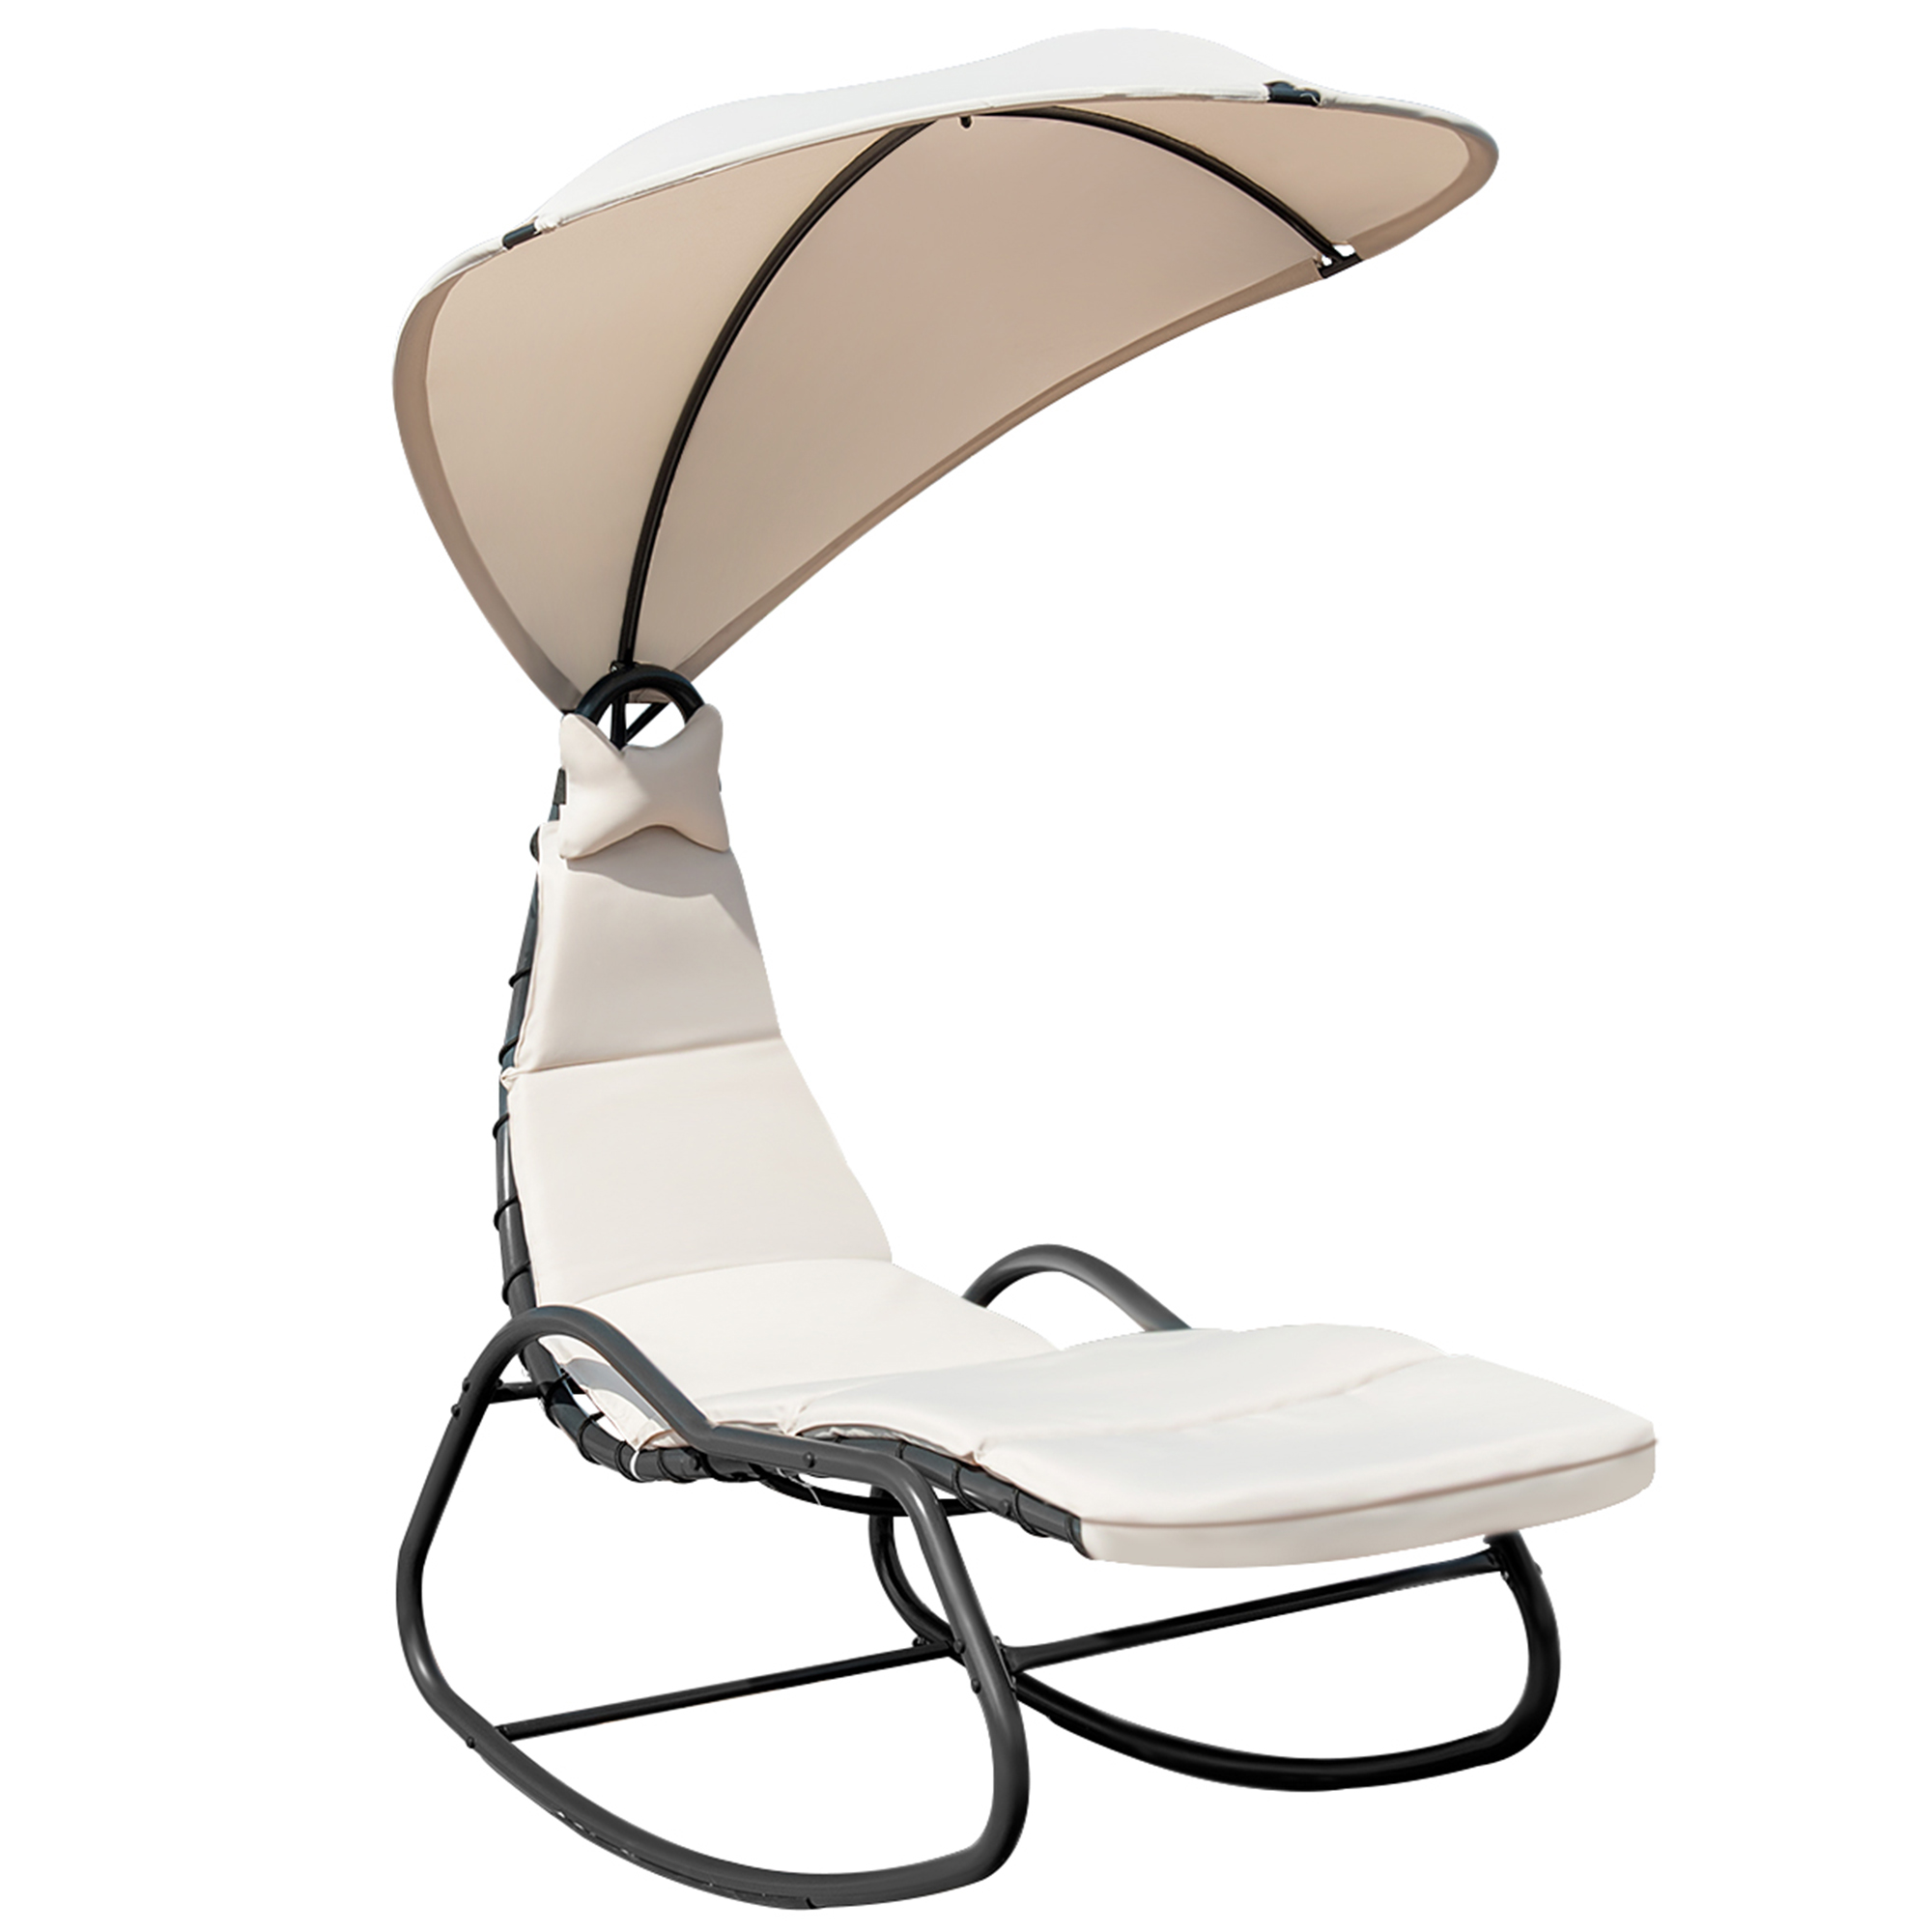 Gymax Patio Lounge Chair Chaise Garden Yard w/ Steel Frame Cushion Canopy Beige - image 3 of 10